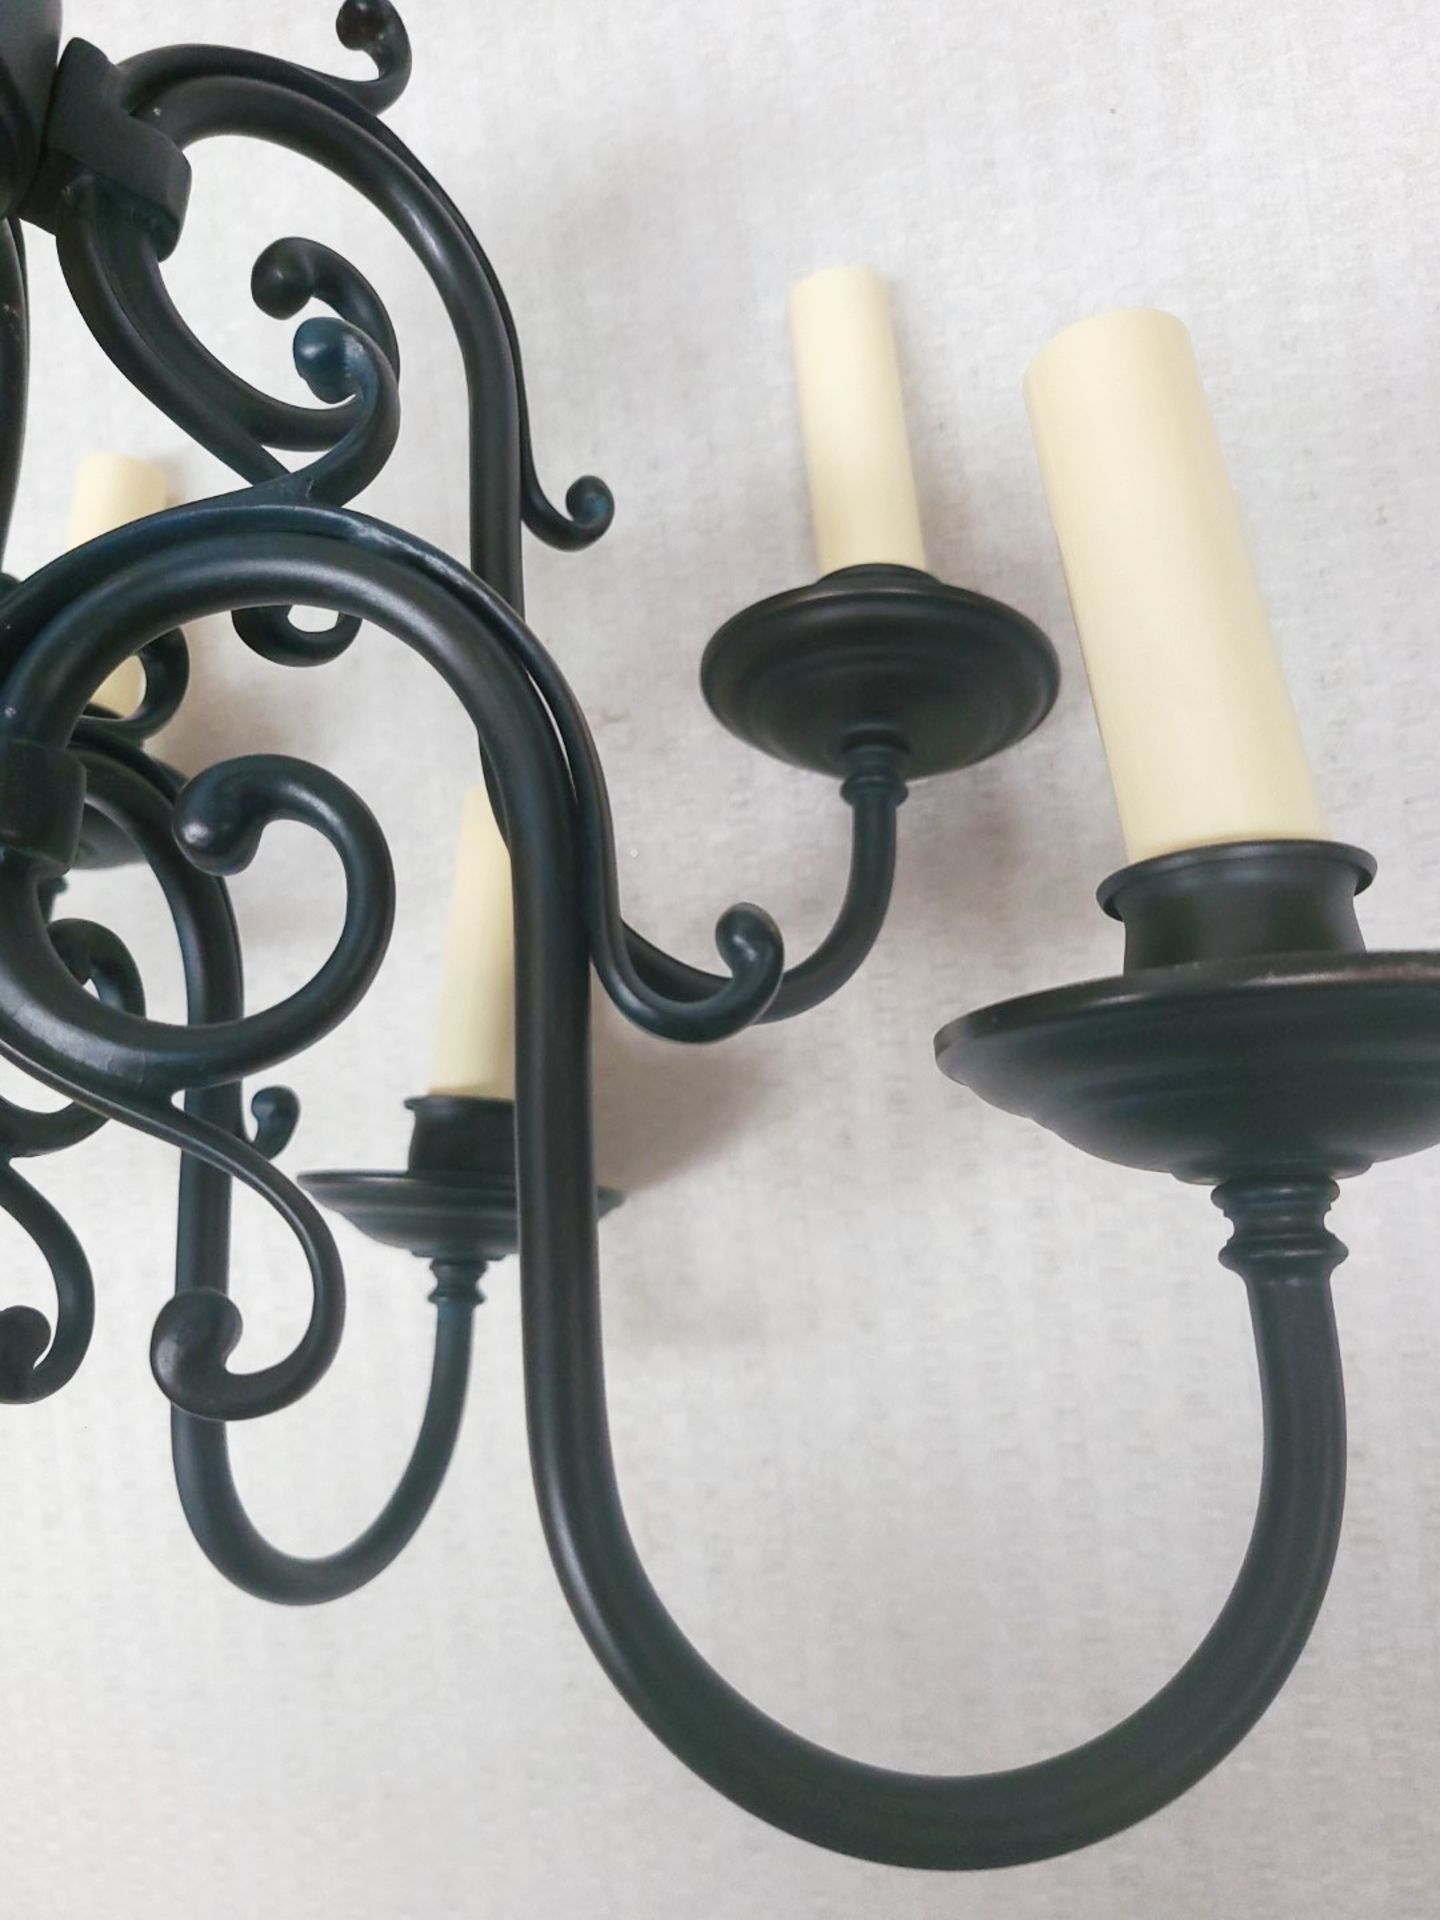 1 x CHELSOM Flemish Style 5 Light Dark Bronze Wall Sconce, With Outswept Curling Arms & Drip Pans - Image 9 of 11